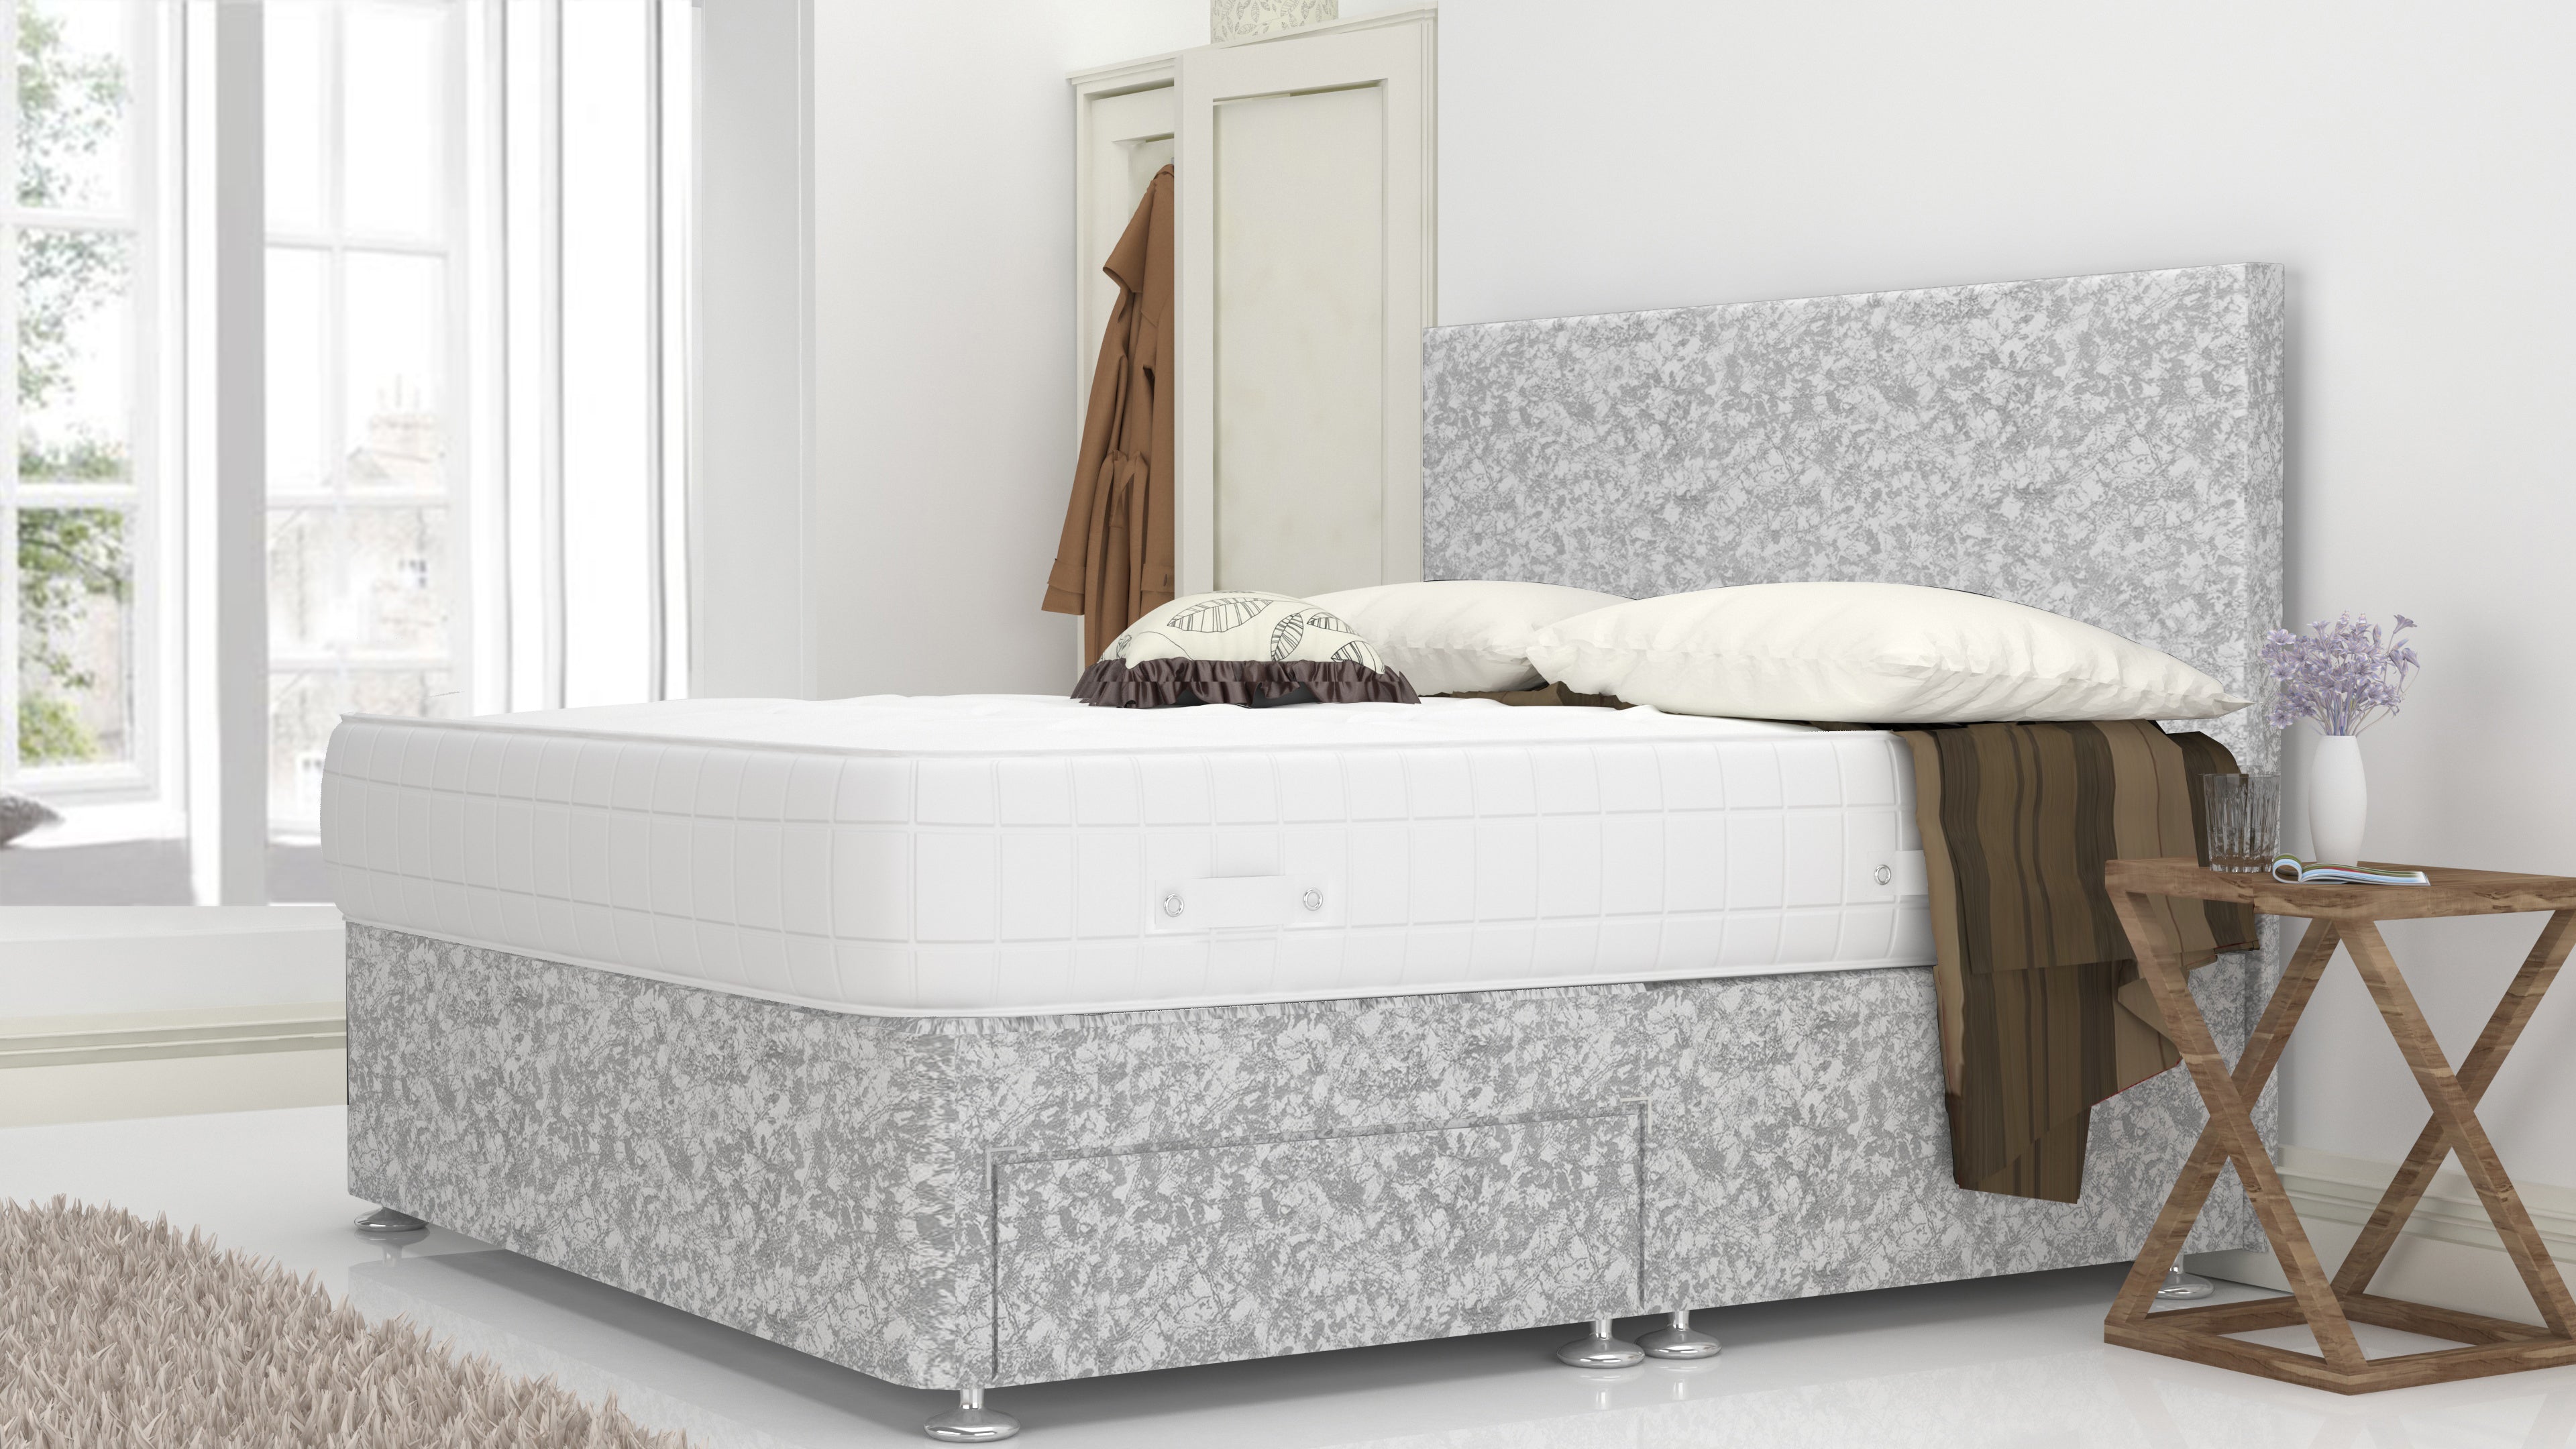 Silver Crushed 4 Feet Divan Bed Set With Plain Headboard (Included Feet) Option And Free Memory Foam Mattress